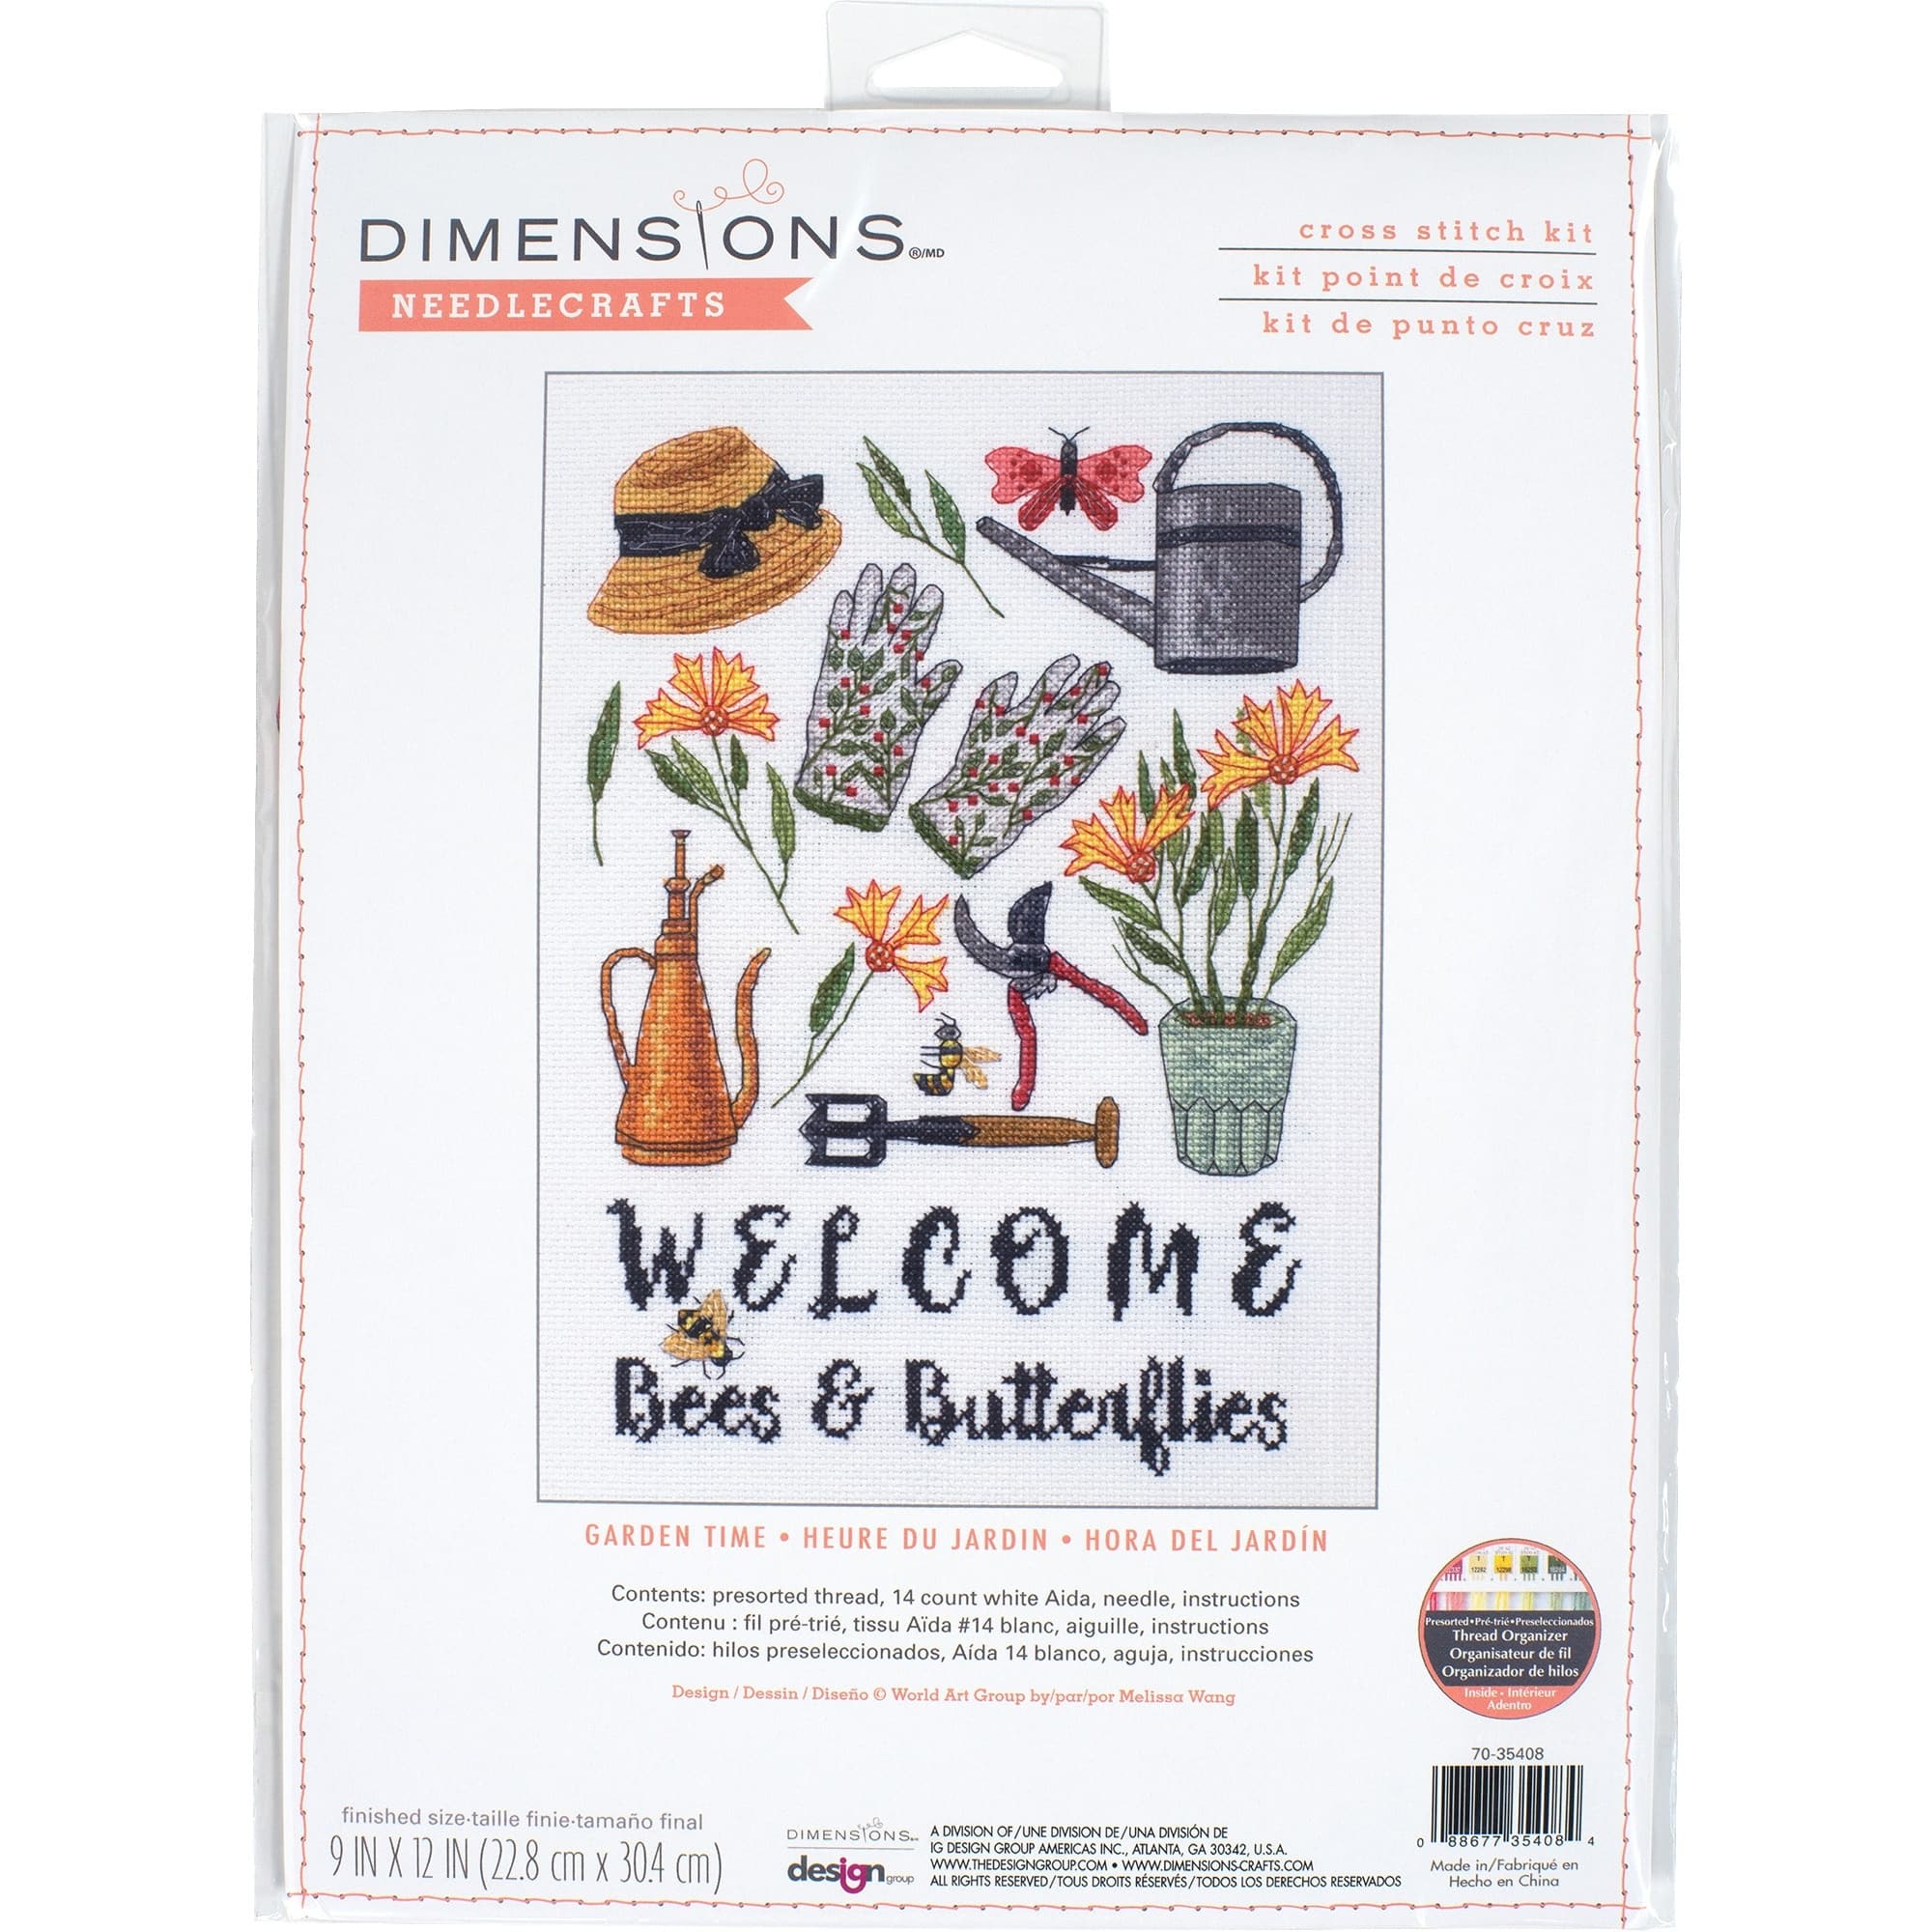 Needlecraft Kits by Dimensions